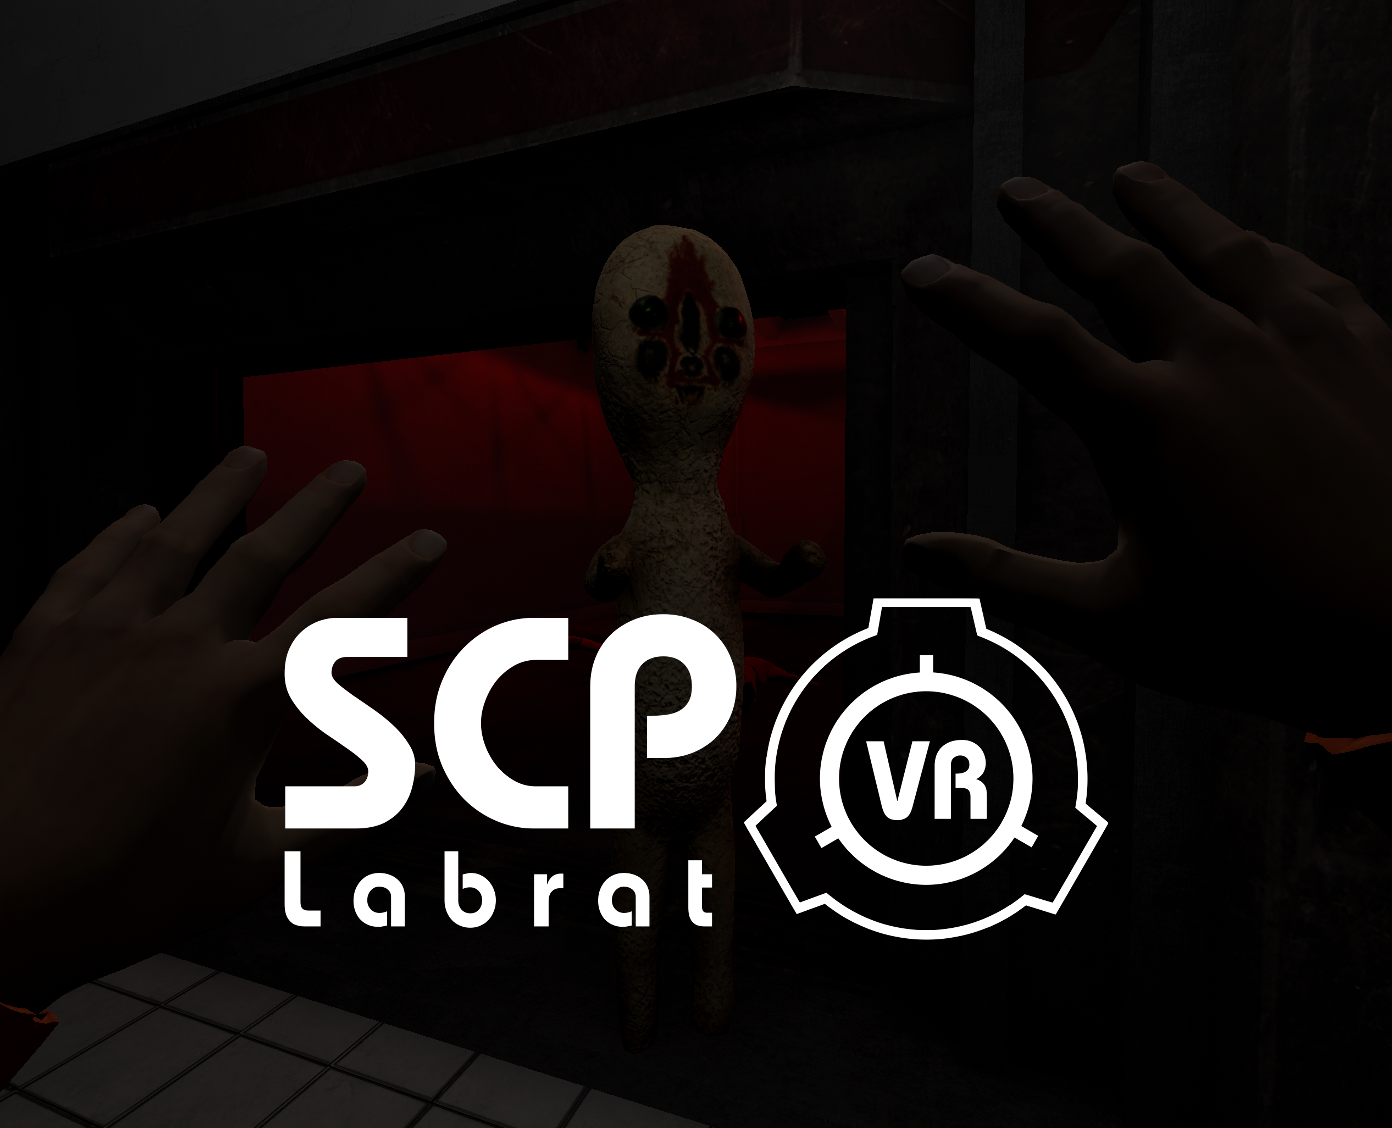 SCP: Secret Files looks like the most ambitious SCP game yet, and